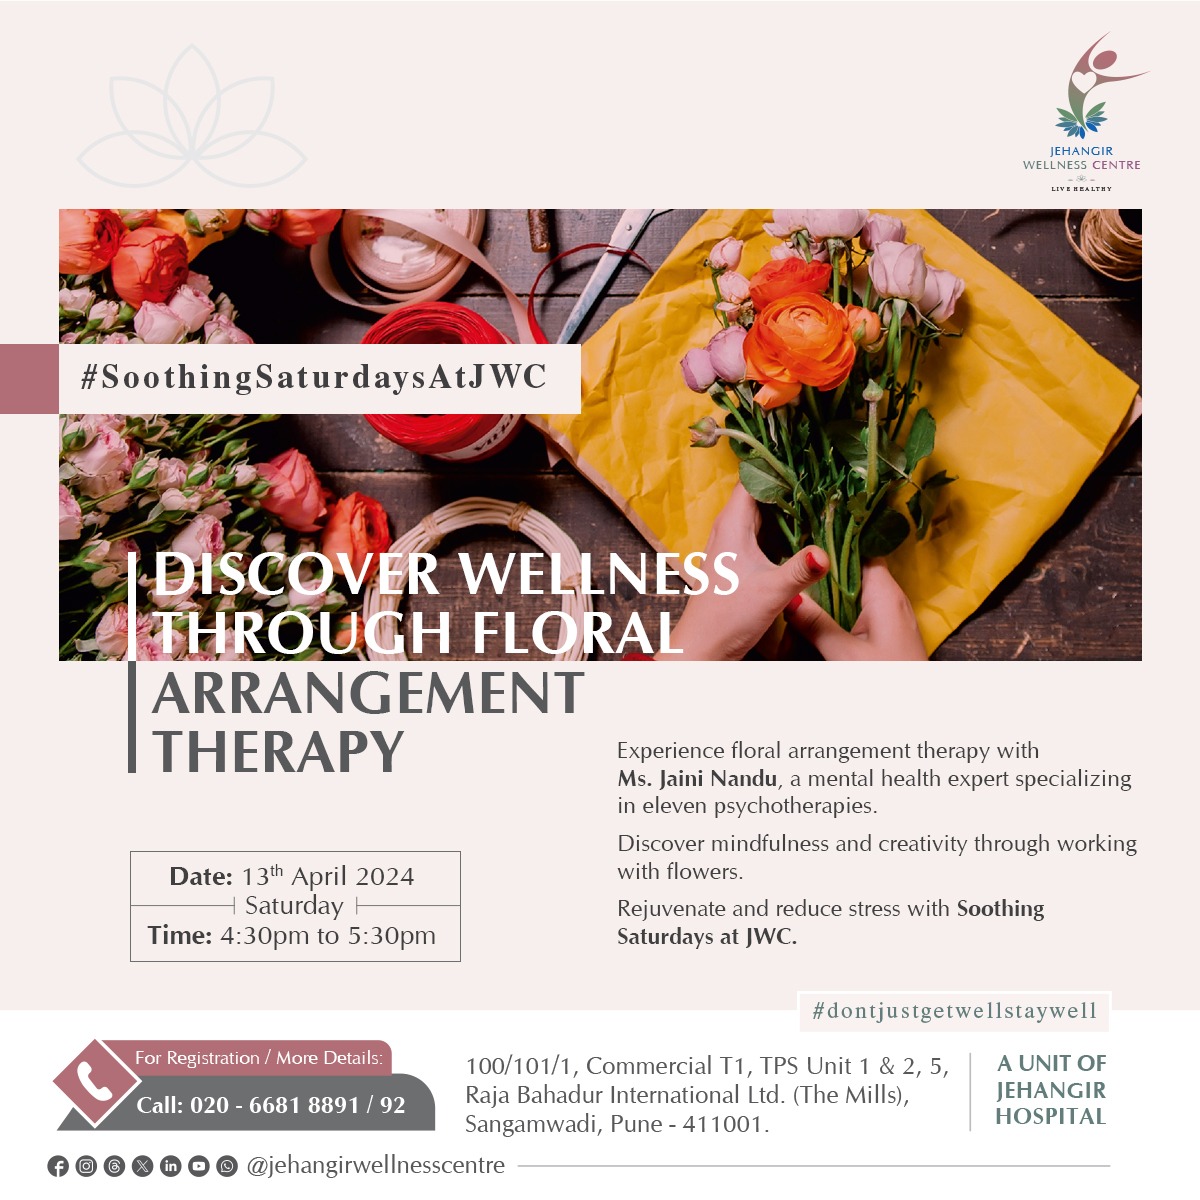 Unwind and explore wellness through the art of floral arrangement therapy at Jehangir Wellness Centre this Saturday, April 13th, 2024, from 4:30 pm to 5:30 pm. Join Ms. Jaini Nandu, a seasoned mental health expert
#floralarrangementtherapy #JehangirWellnessCentre #mentalhealth